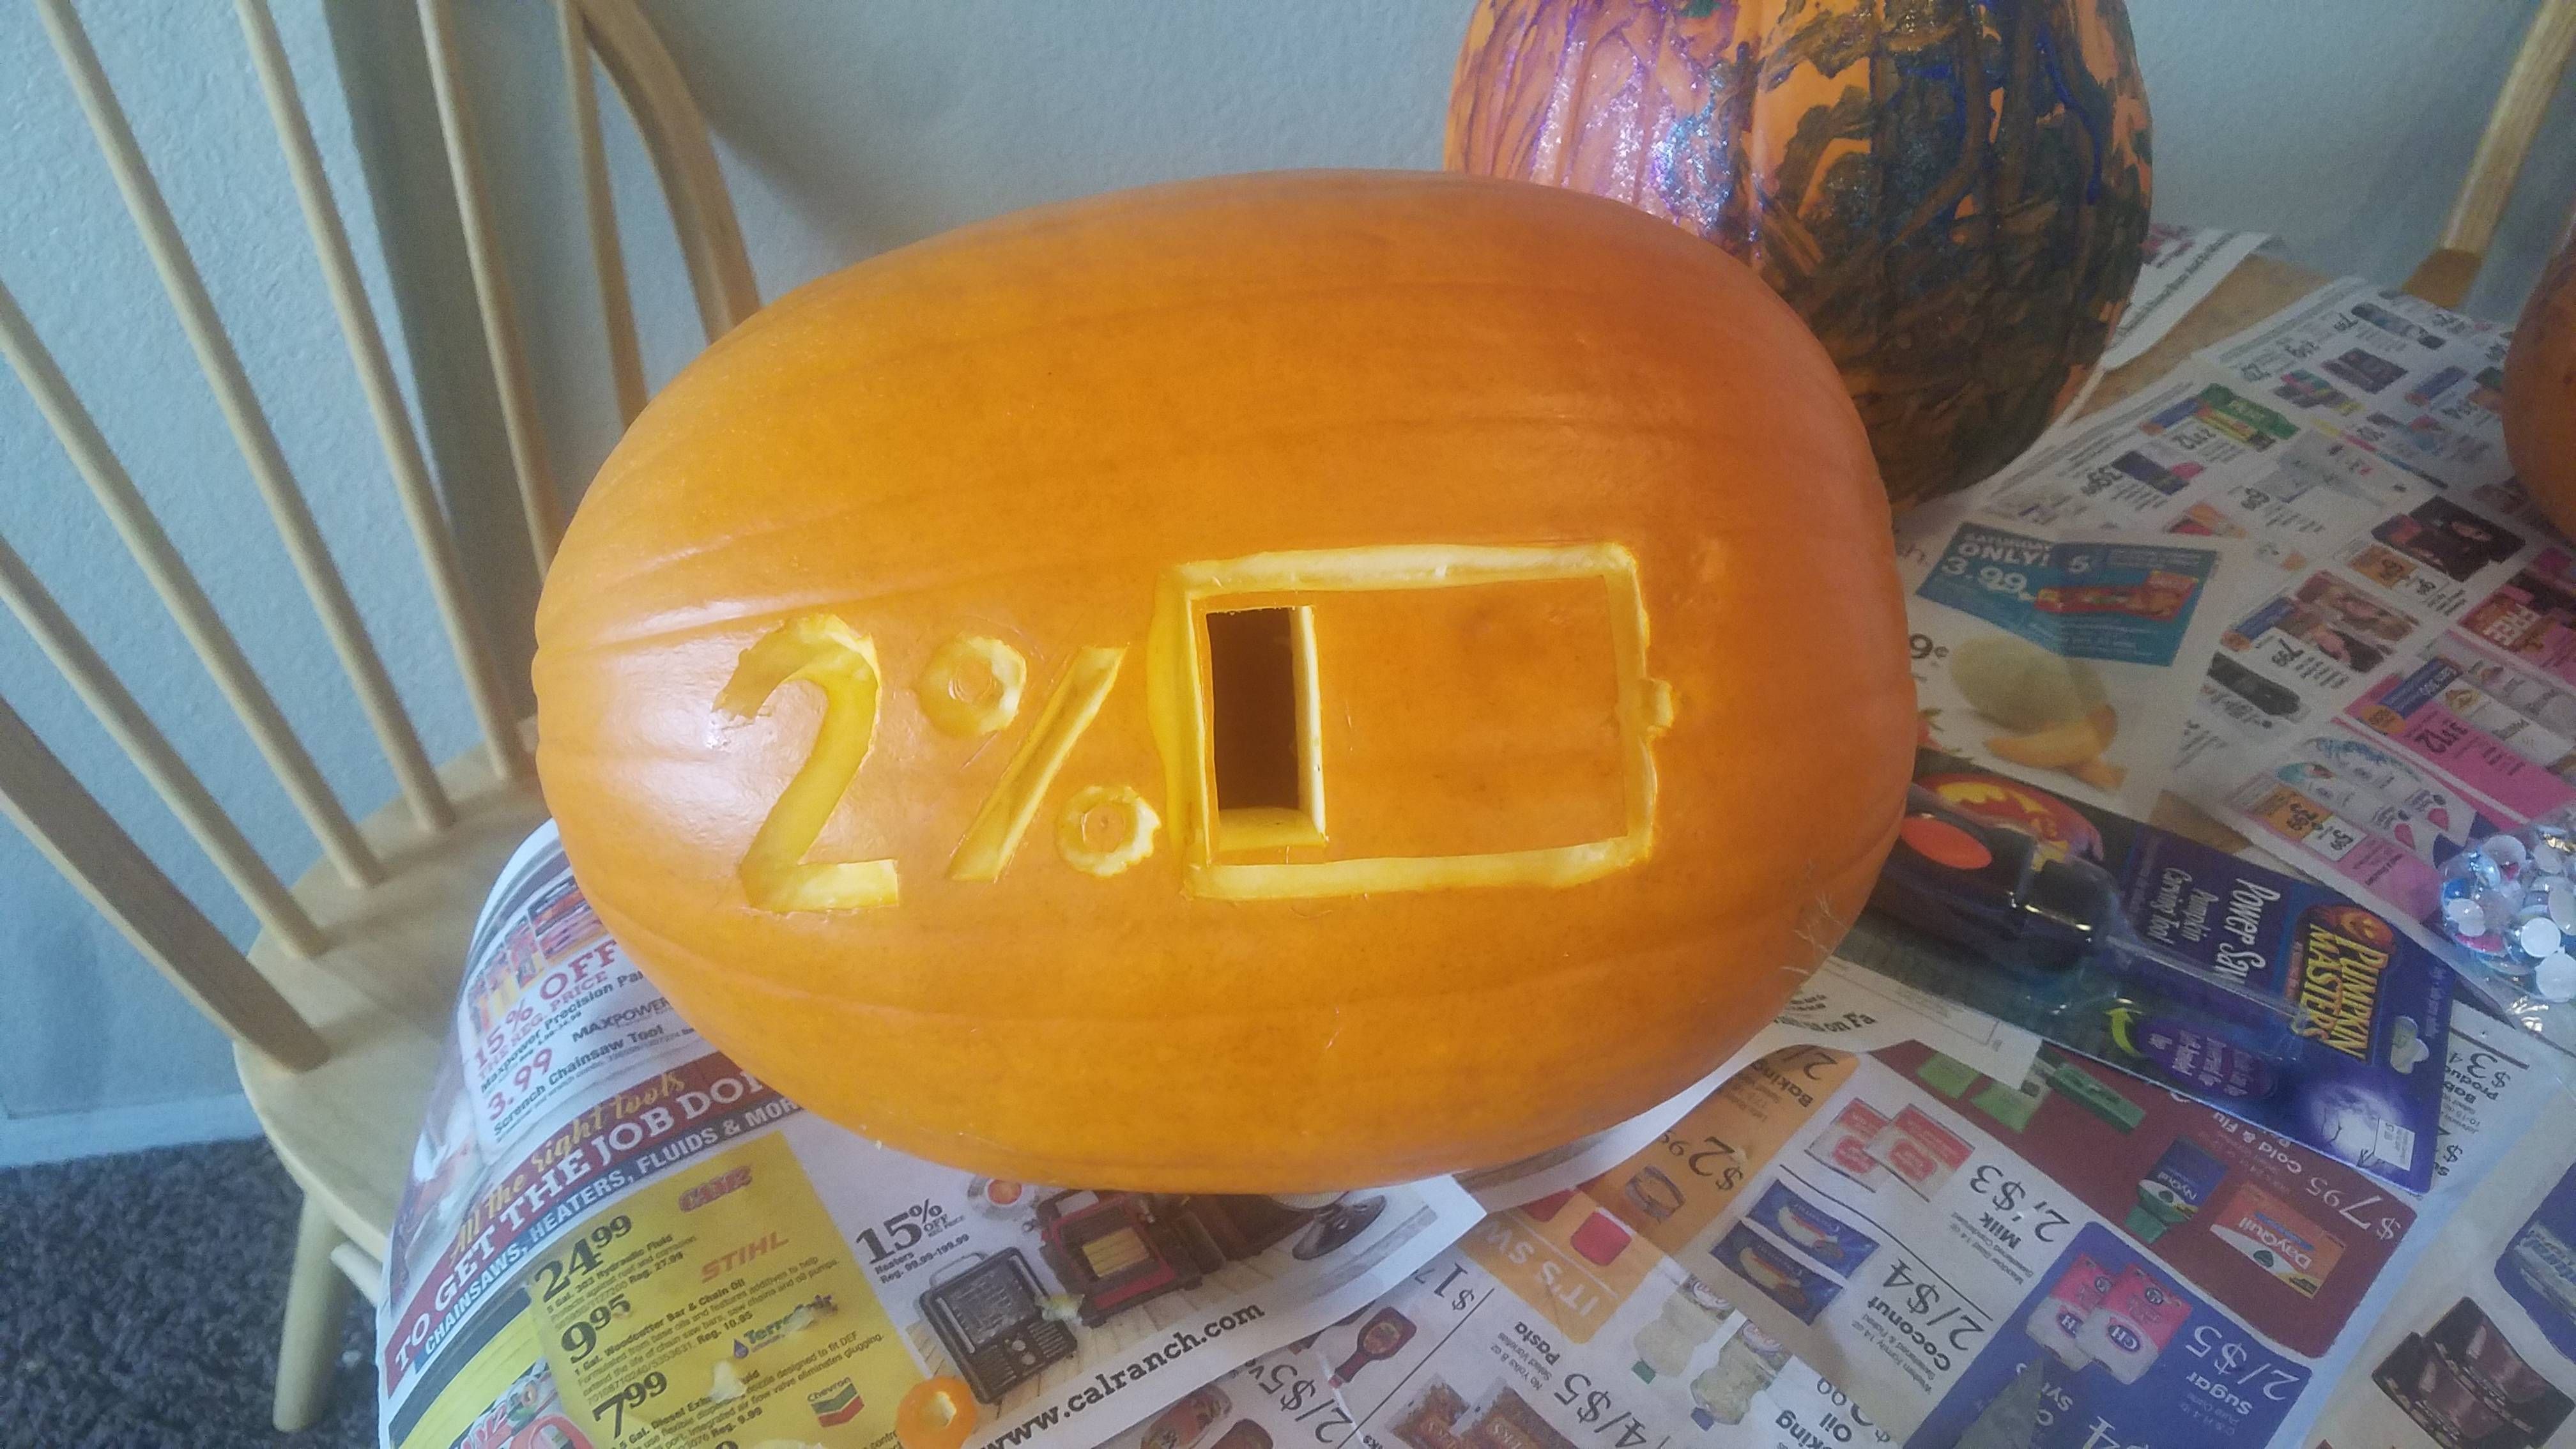 I carved the scariest pumpkin I could imagine.